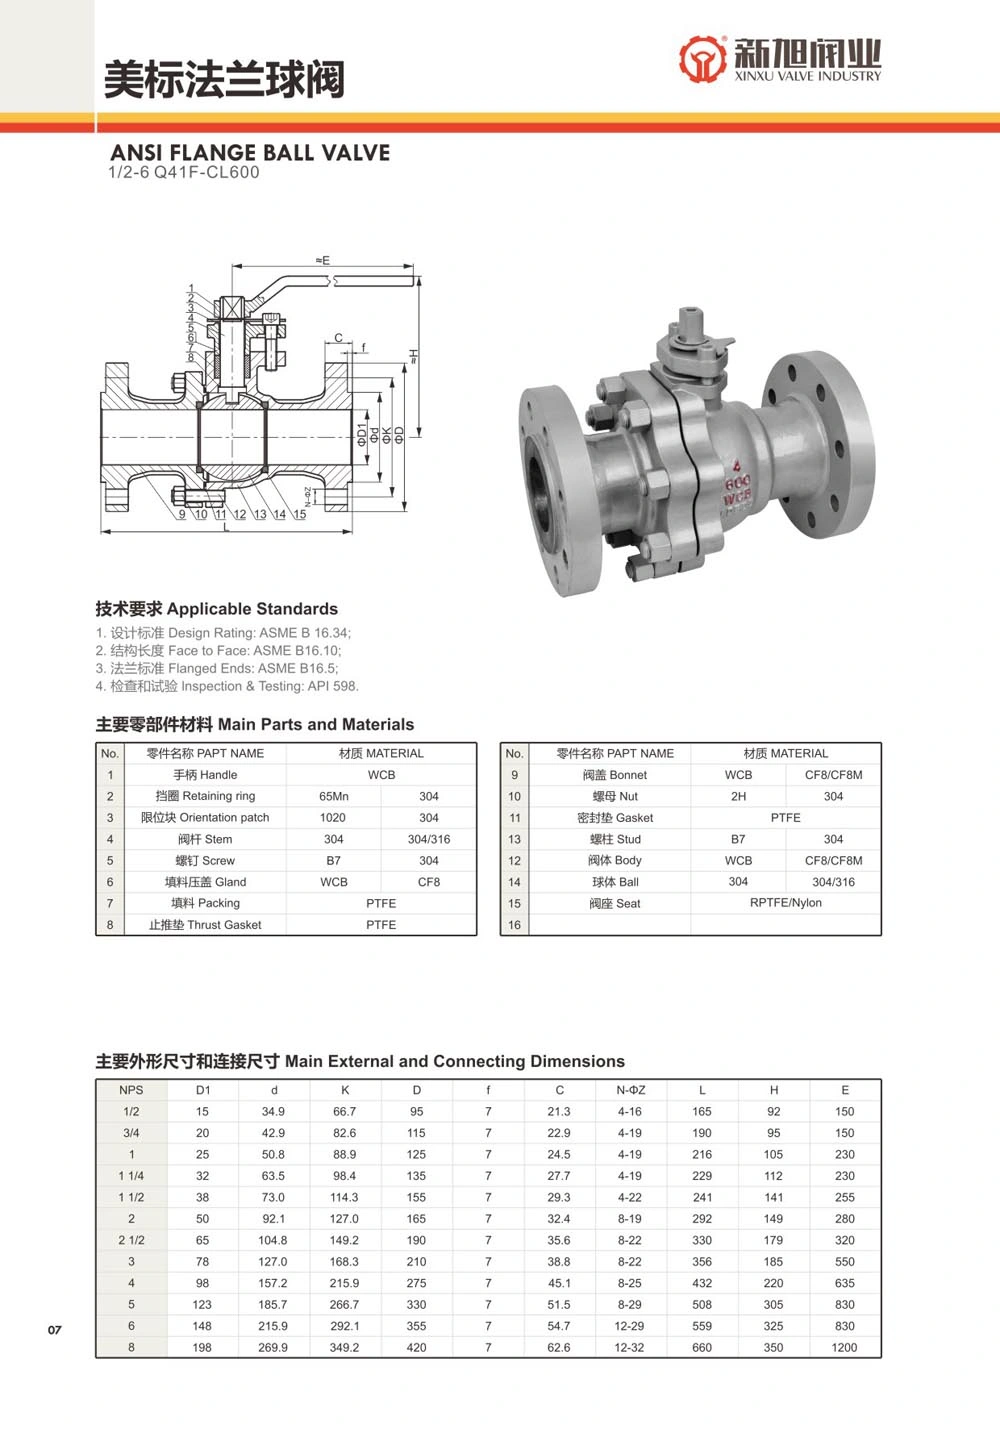 Class 150 Investment Casting Flange Stainless Steel Ball Valve Fire Safe Wcb/CF8/CF8m